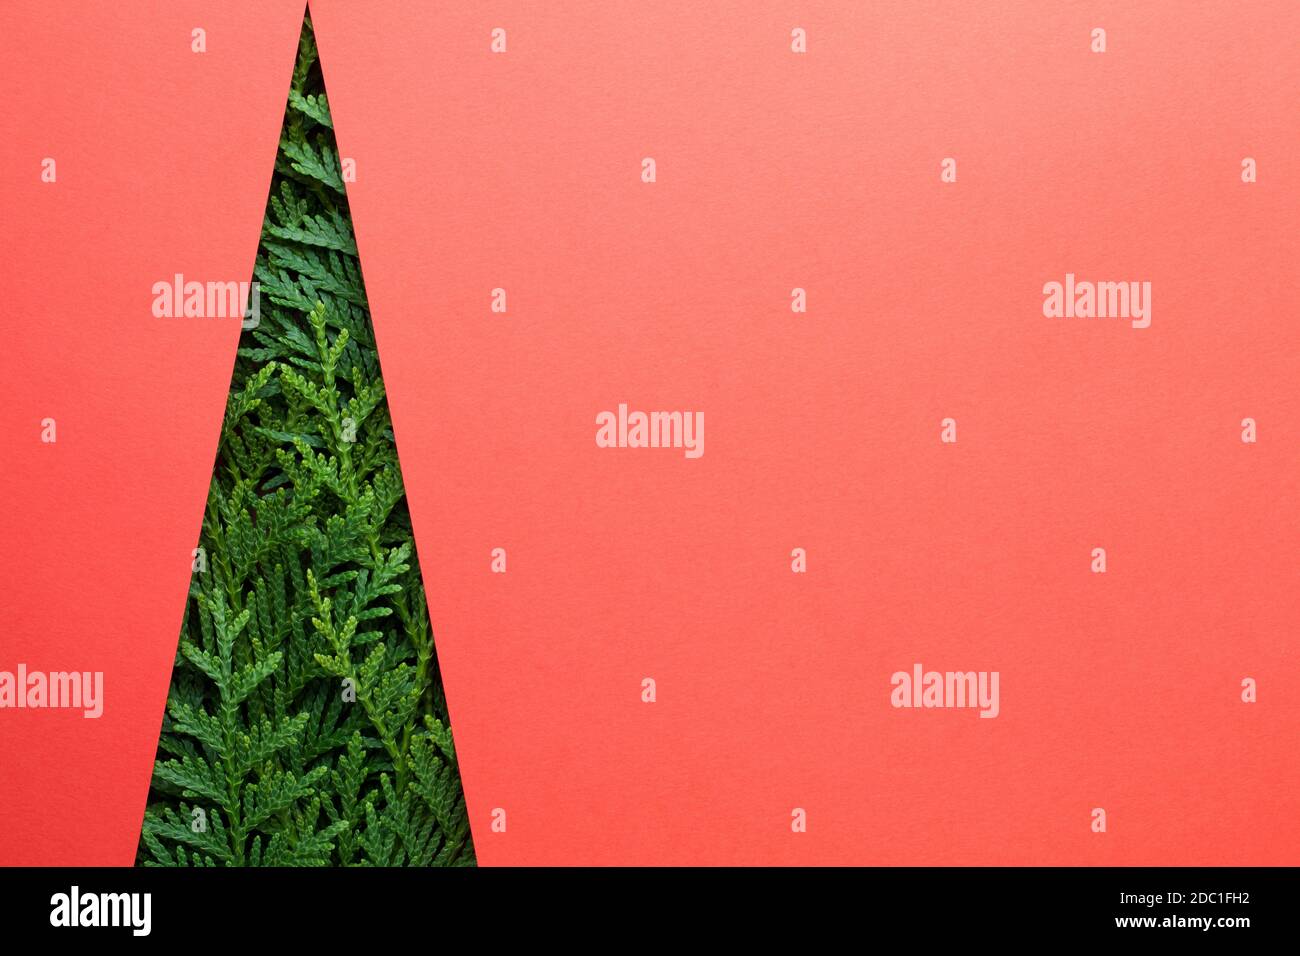 Minimal creative christmas tree made of thuja twigs. Copy space on red paper background. Top view Stock Photo